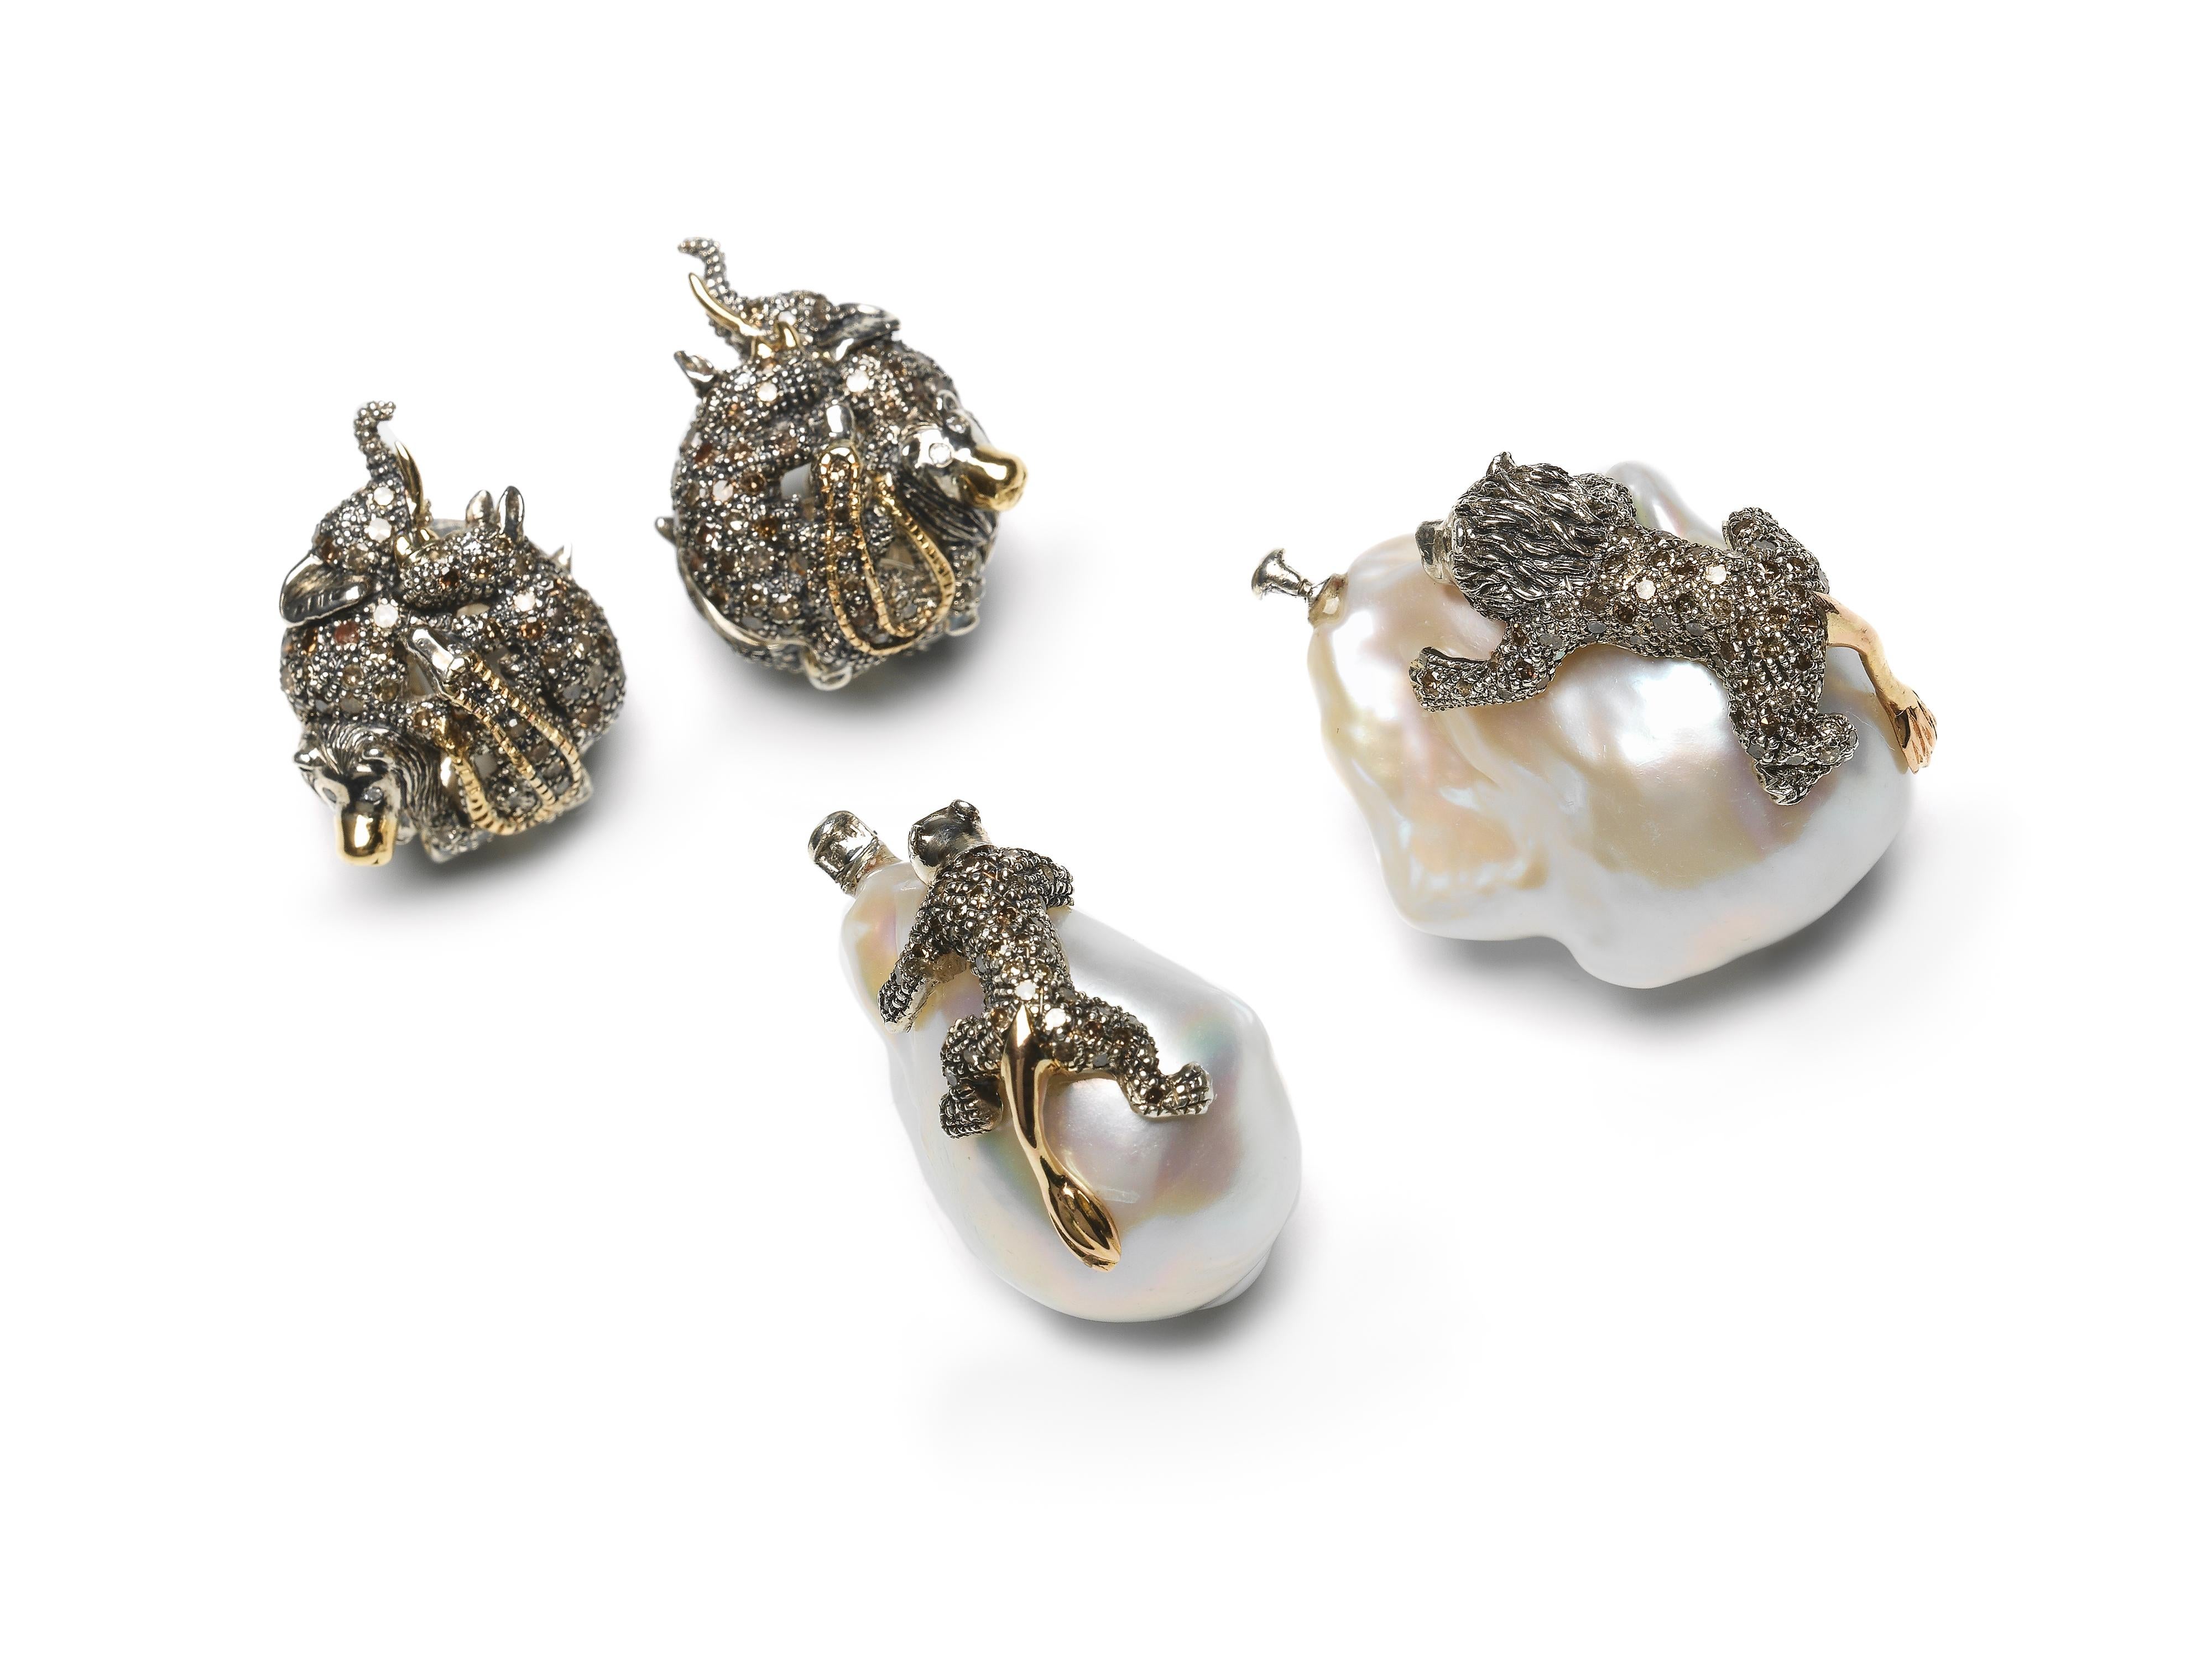 Two beautiful baroque pearls are the focal point of these drop earrings, with the pearls set with animals that appear to crawl up their irregular surface. The animals shown here are male and female lions, but the creatures can be customized to